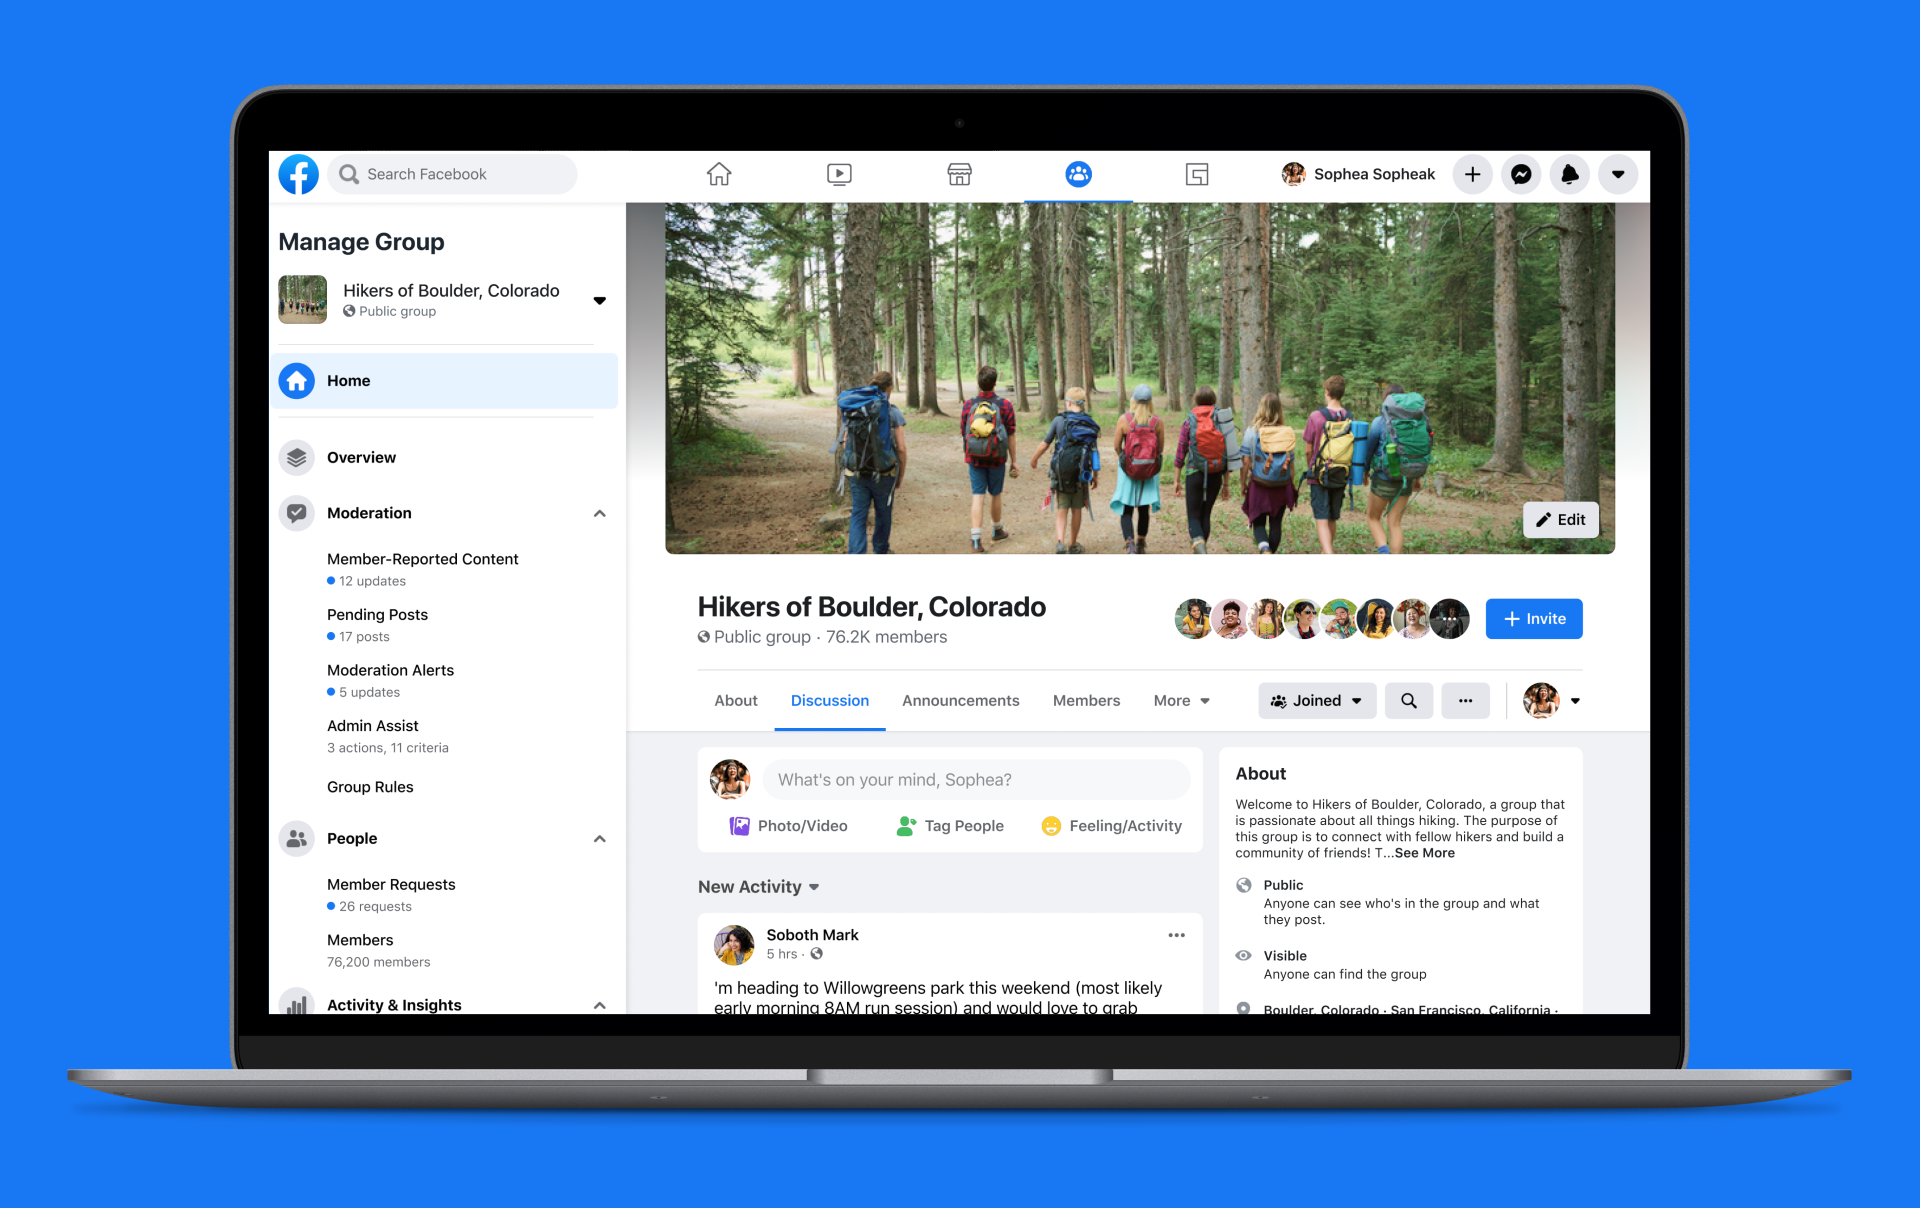 Facebook rolls out new tools for Group admins, including automated moderation aids